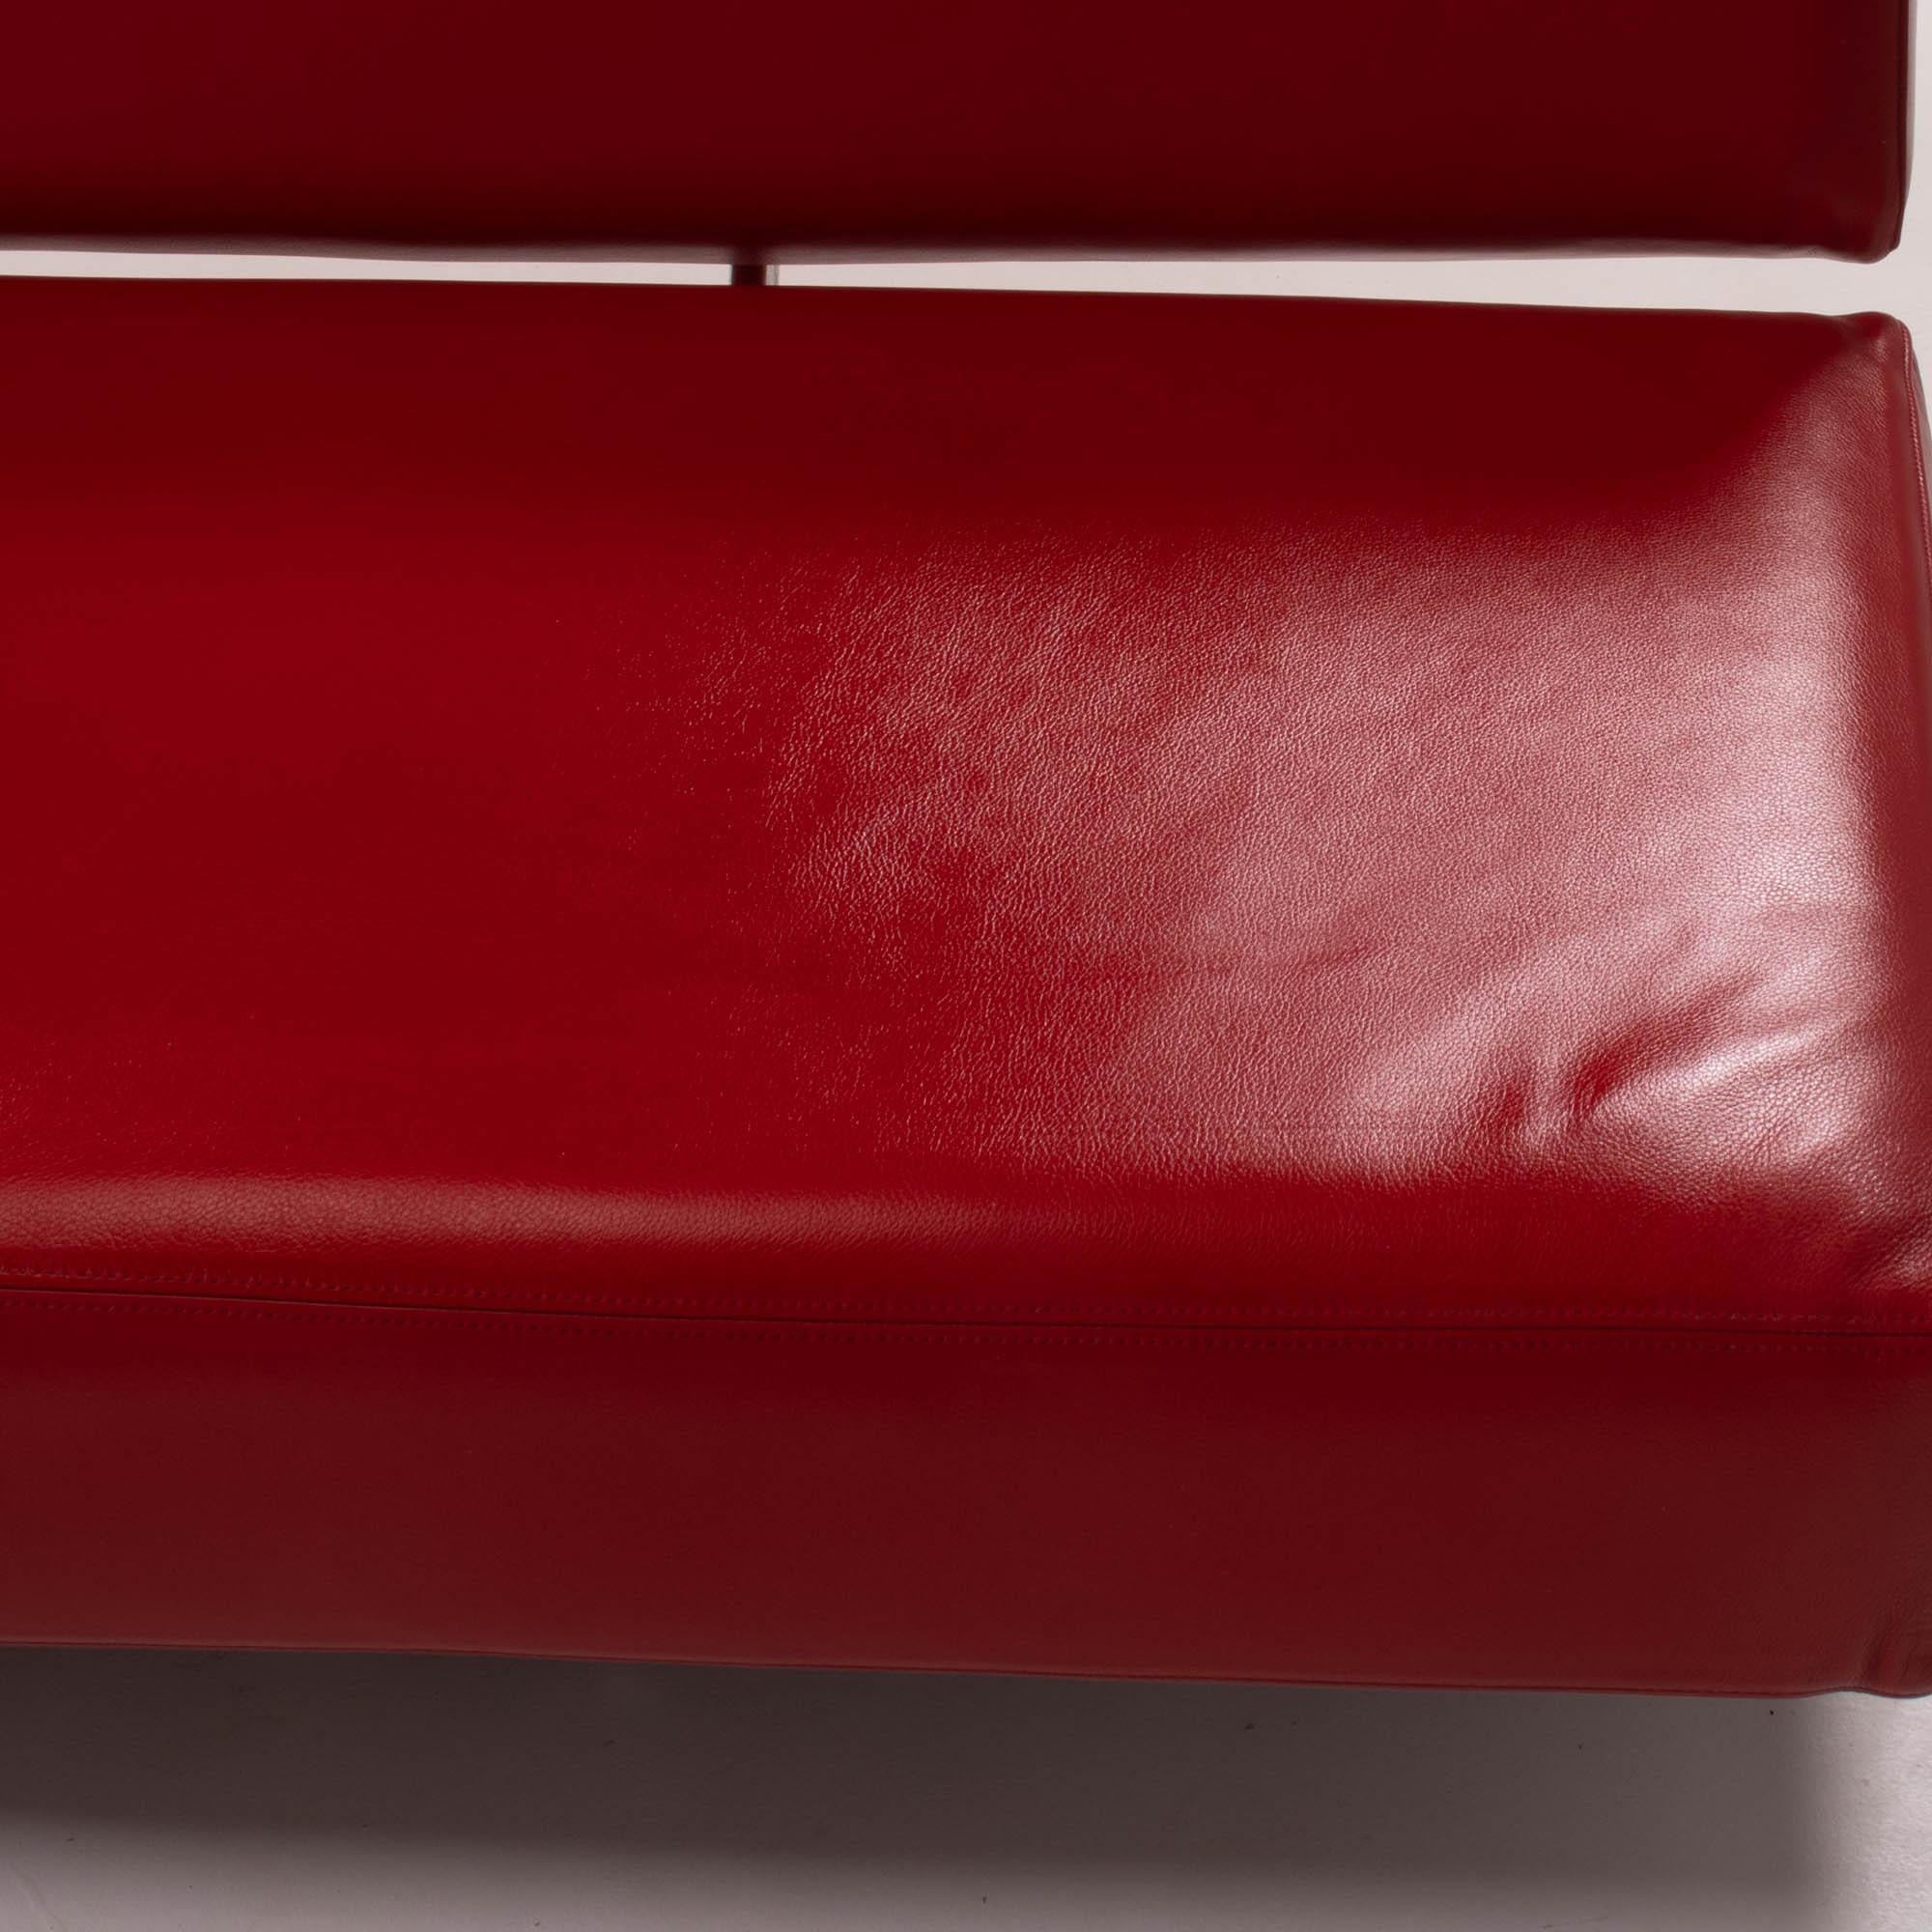 Cassina Asped Red Leather Sofa Byjean-Marie Massaud, 2005 2